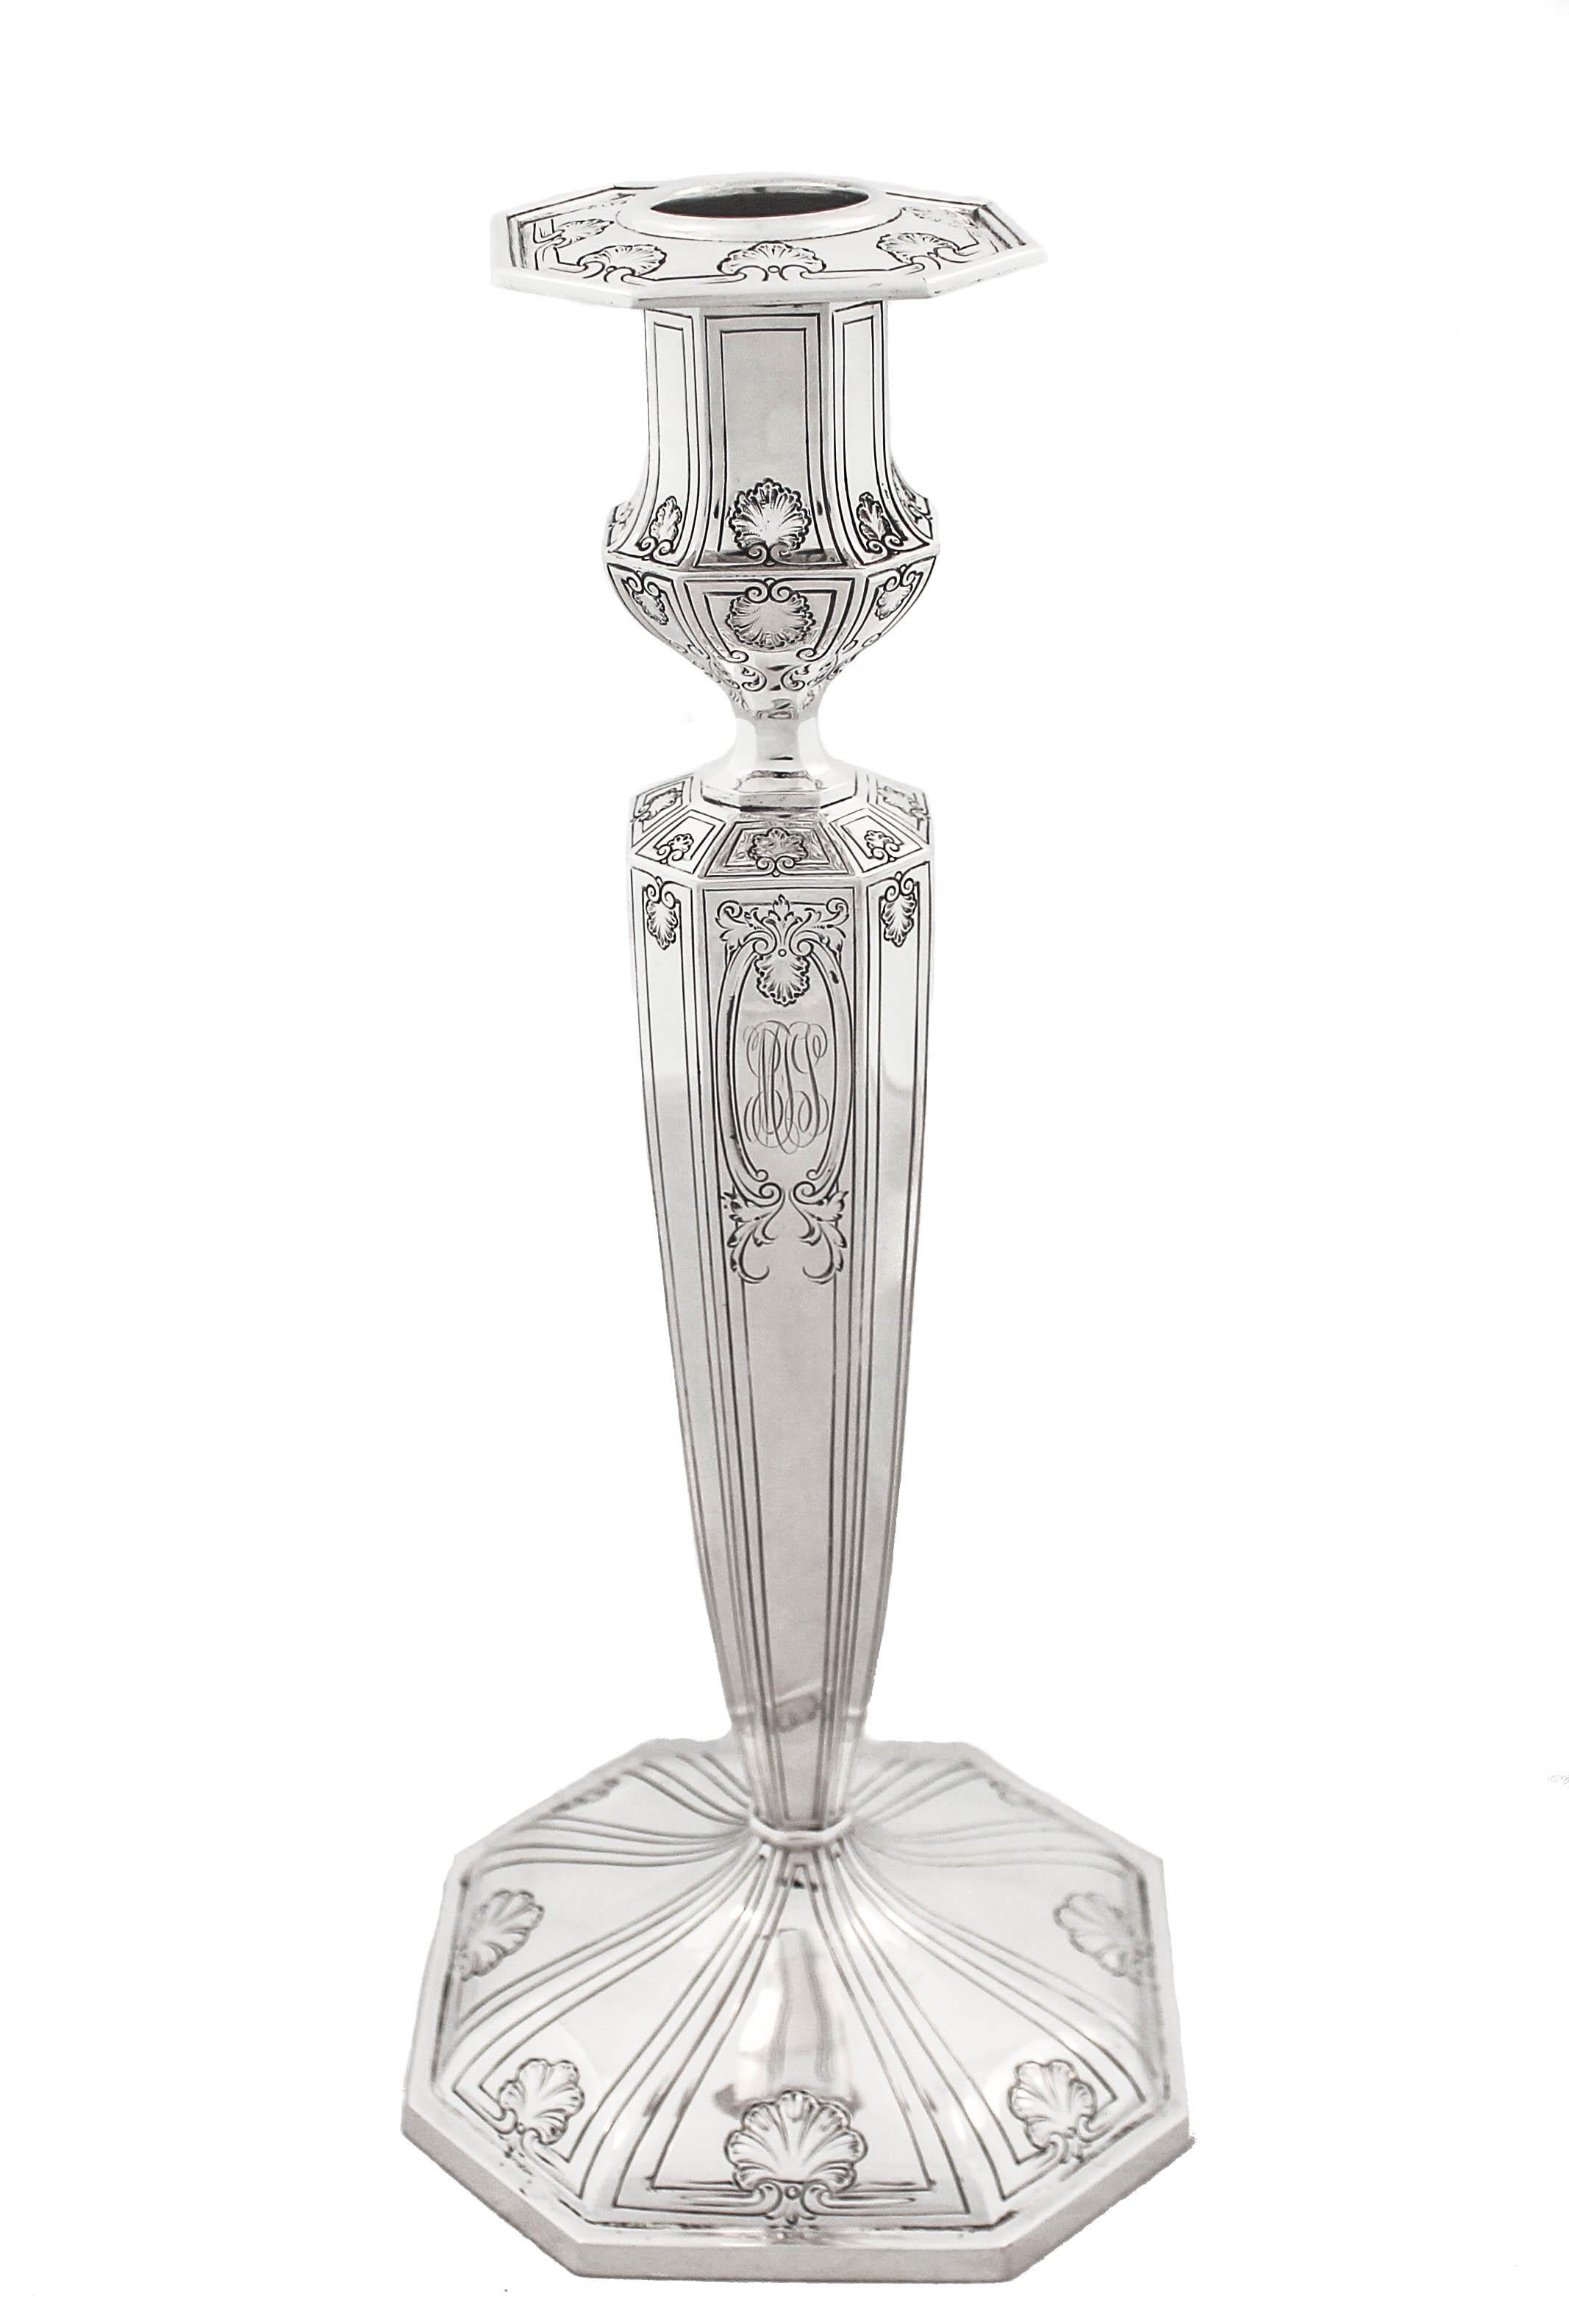 Being offered is an exceptionally tall and beautiful pair of candlesticks by Dominick and Haff of New York.
They have an etched motif throughout the base, body and top; a fan shaped design and leaves decorate each corner.  The base is octagonal and